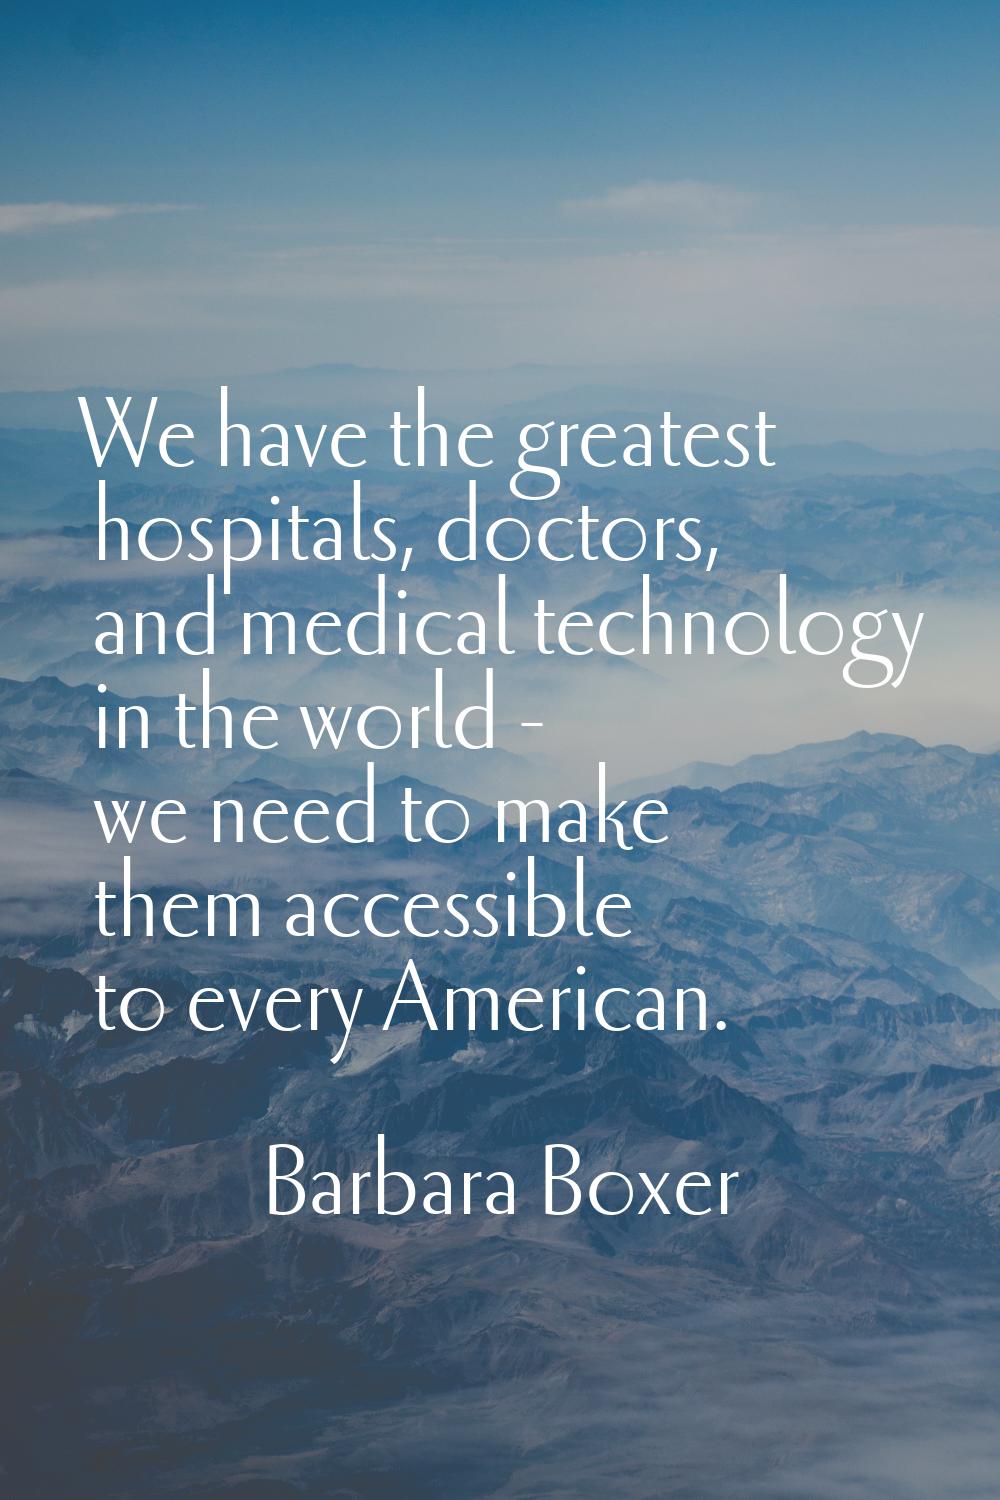 We have the greatest hospitals, doctors, and medical technology in the world - we need to make them